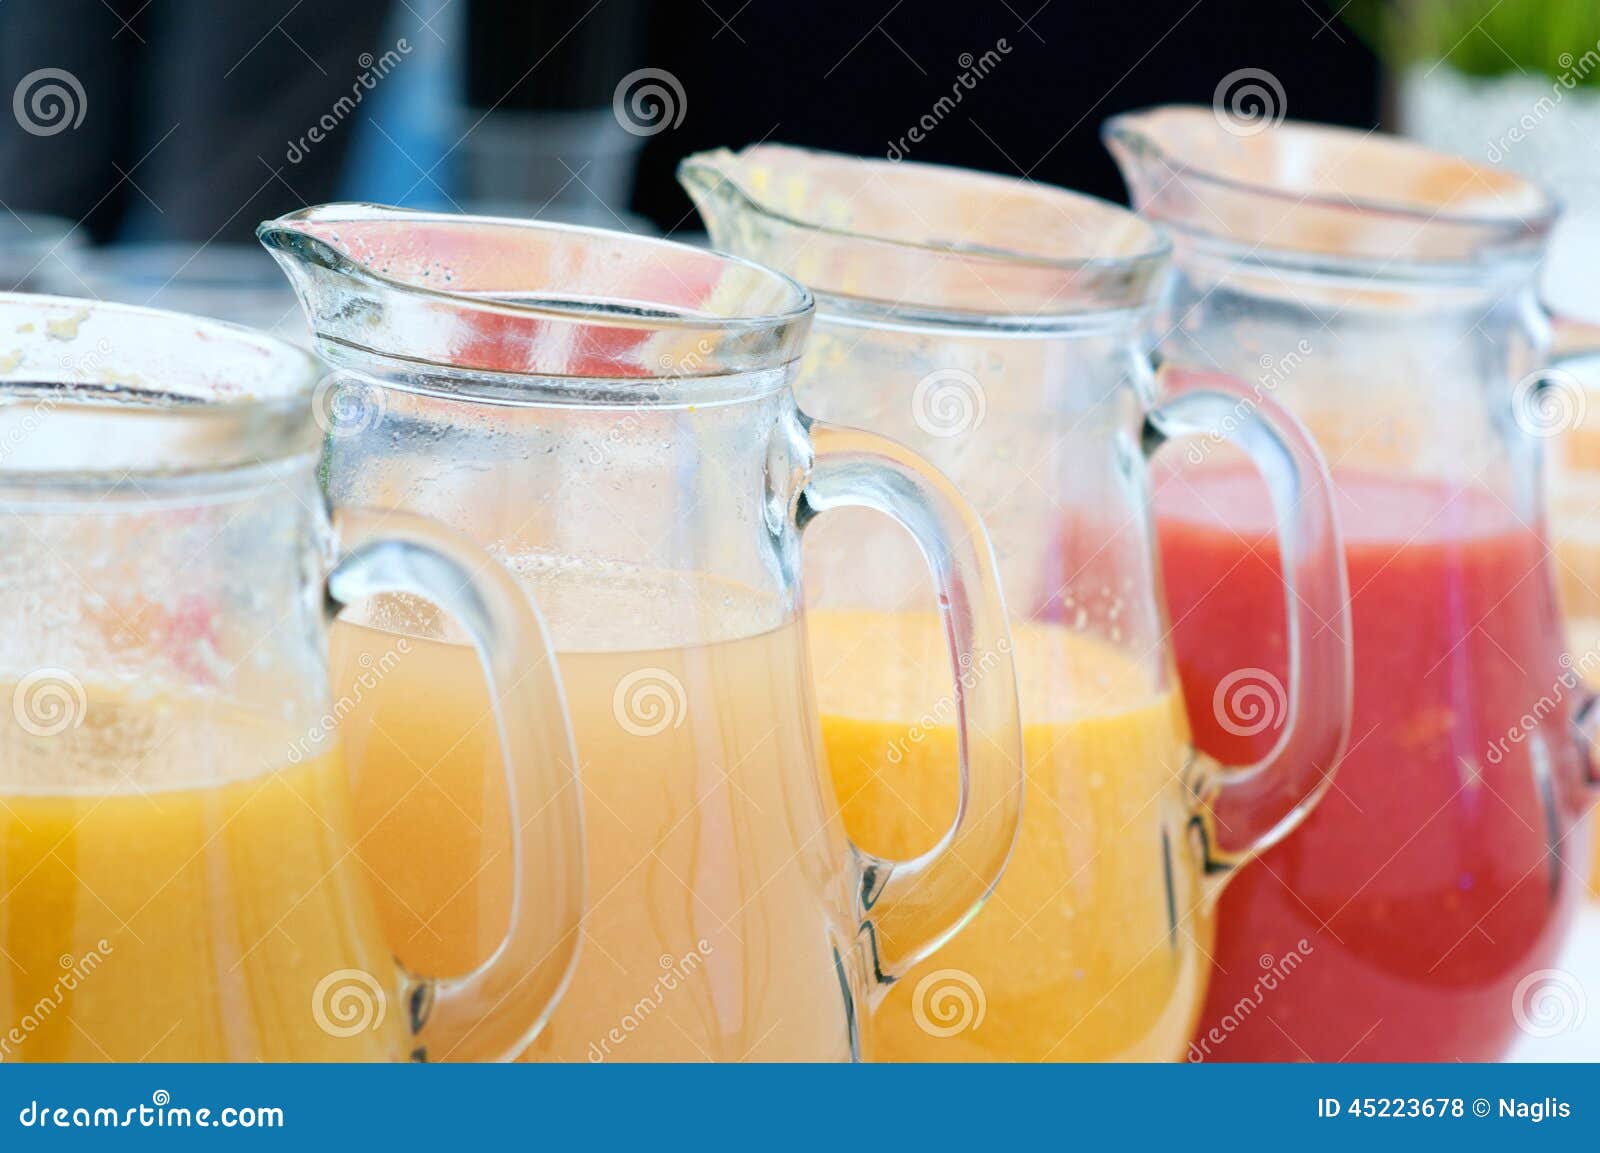 326 Jugs Fruit Juice Stock Photos - Free & Royalty-Free Stock Photos from  Dreamstime